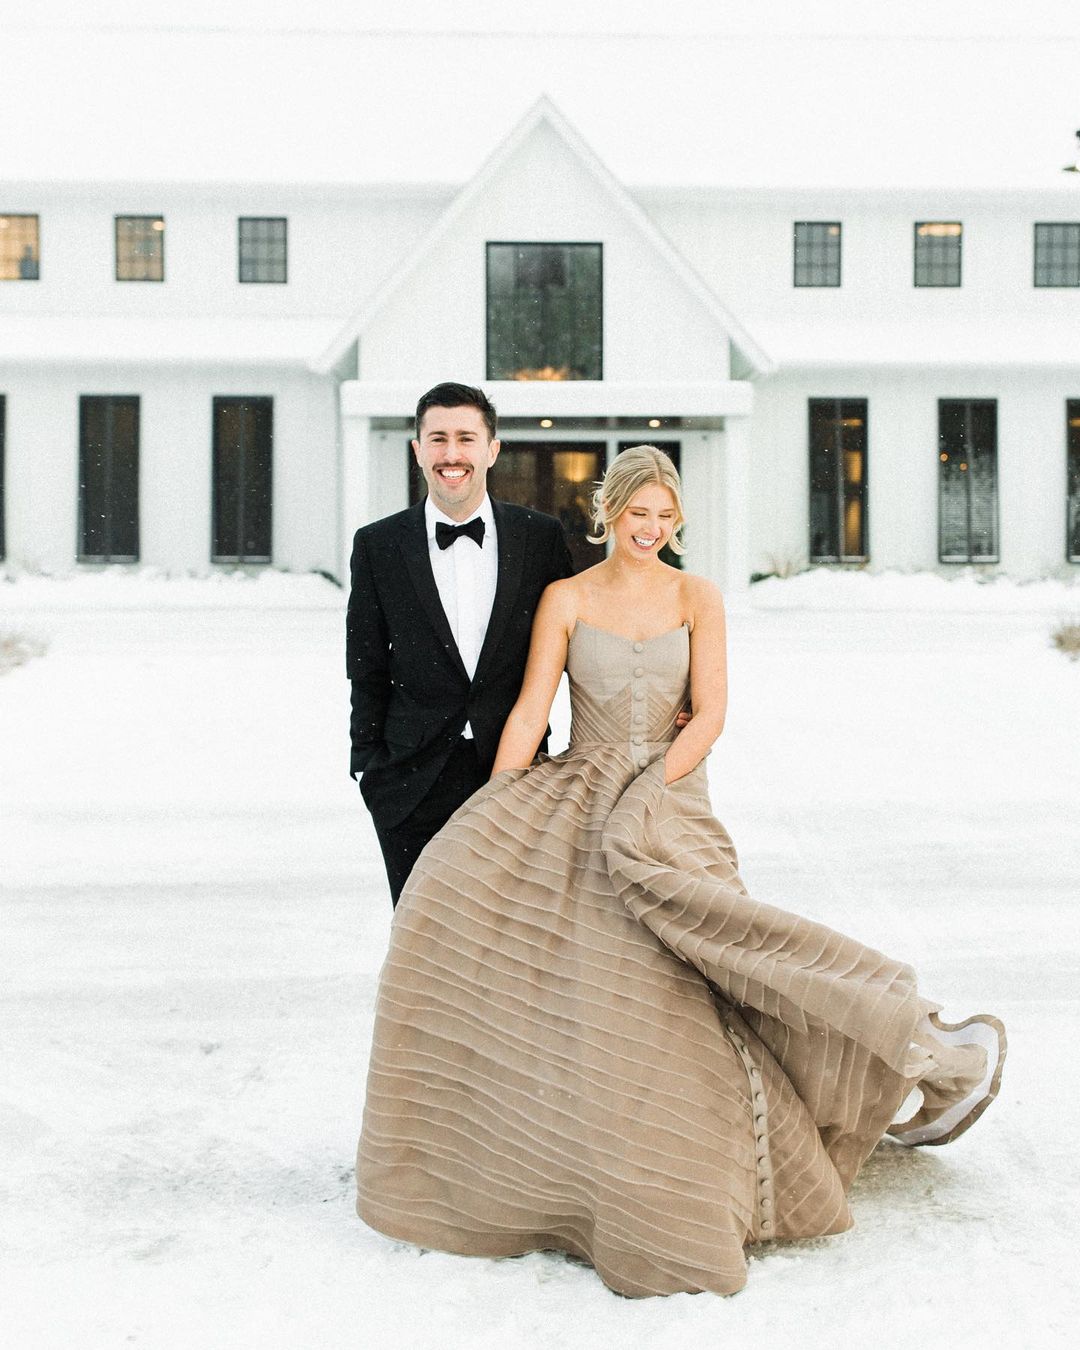 What To Wear To A Winter Wedding: 56 Outfit Options For Any Frosty Nuptial  Celebration ❤️ Blog Wezoree